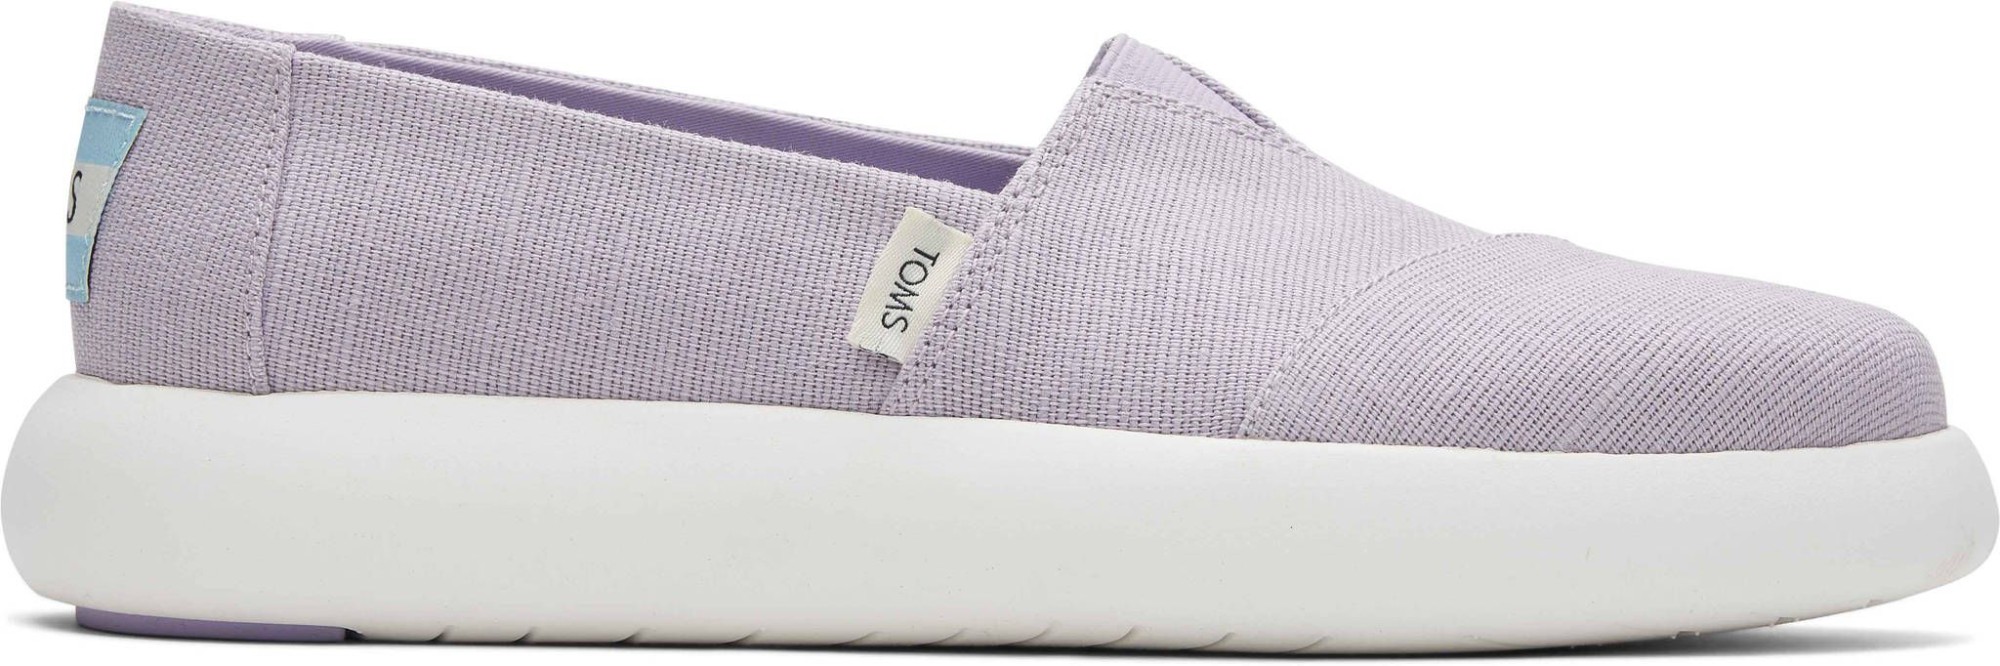 TOMS Heritage Canvas Women's Mallow Sneaker Light Orchid 37